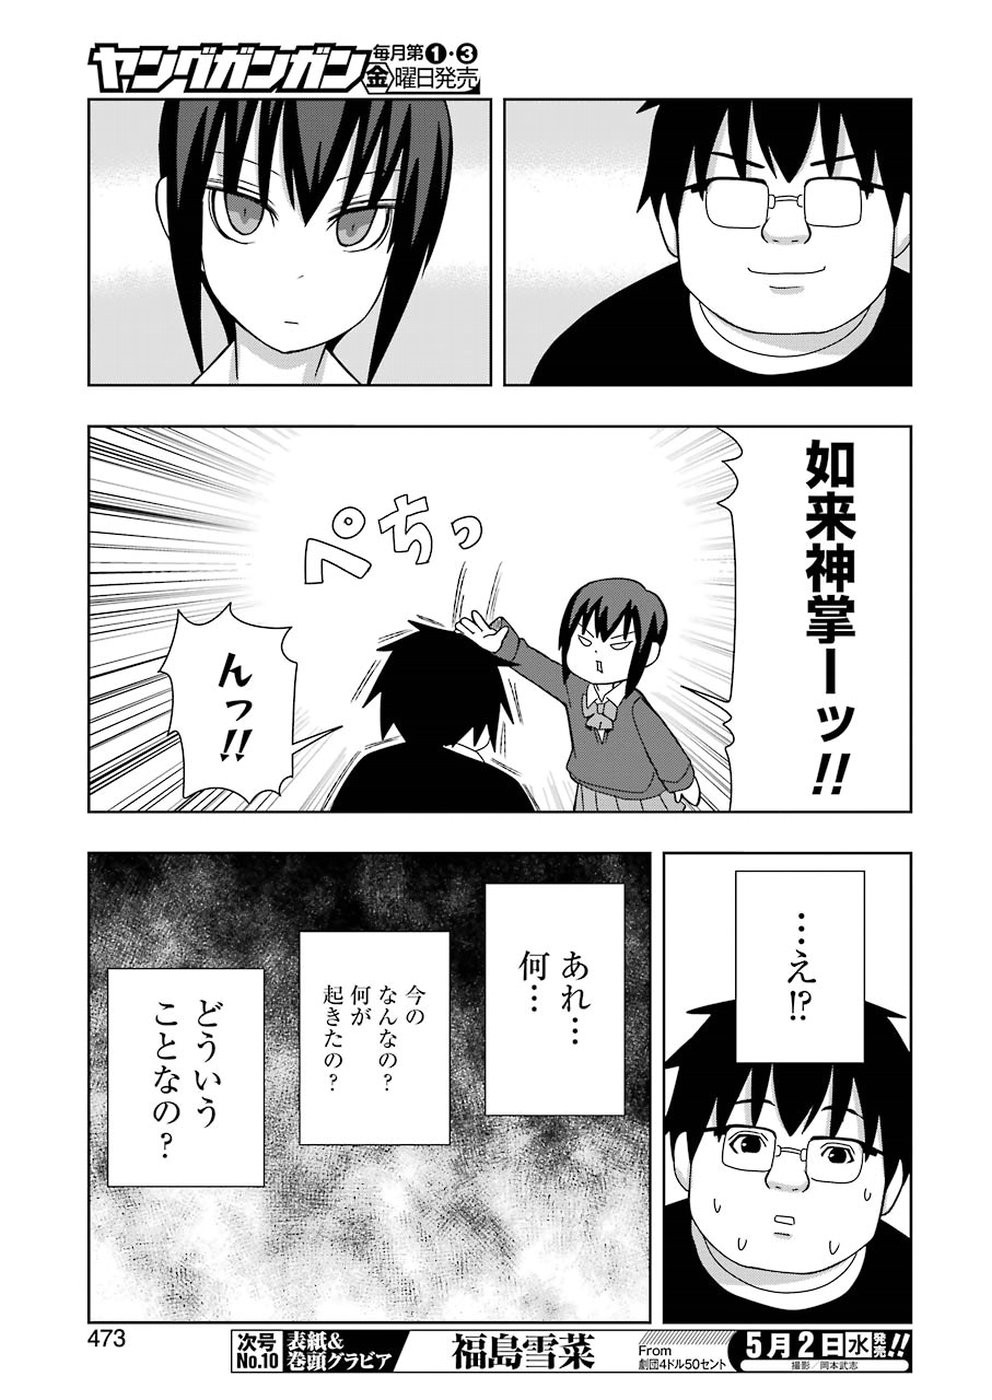 + Tic Nee-san - Chapter 163 - Page 3